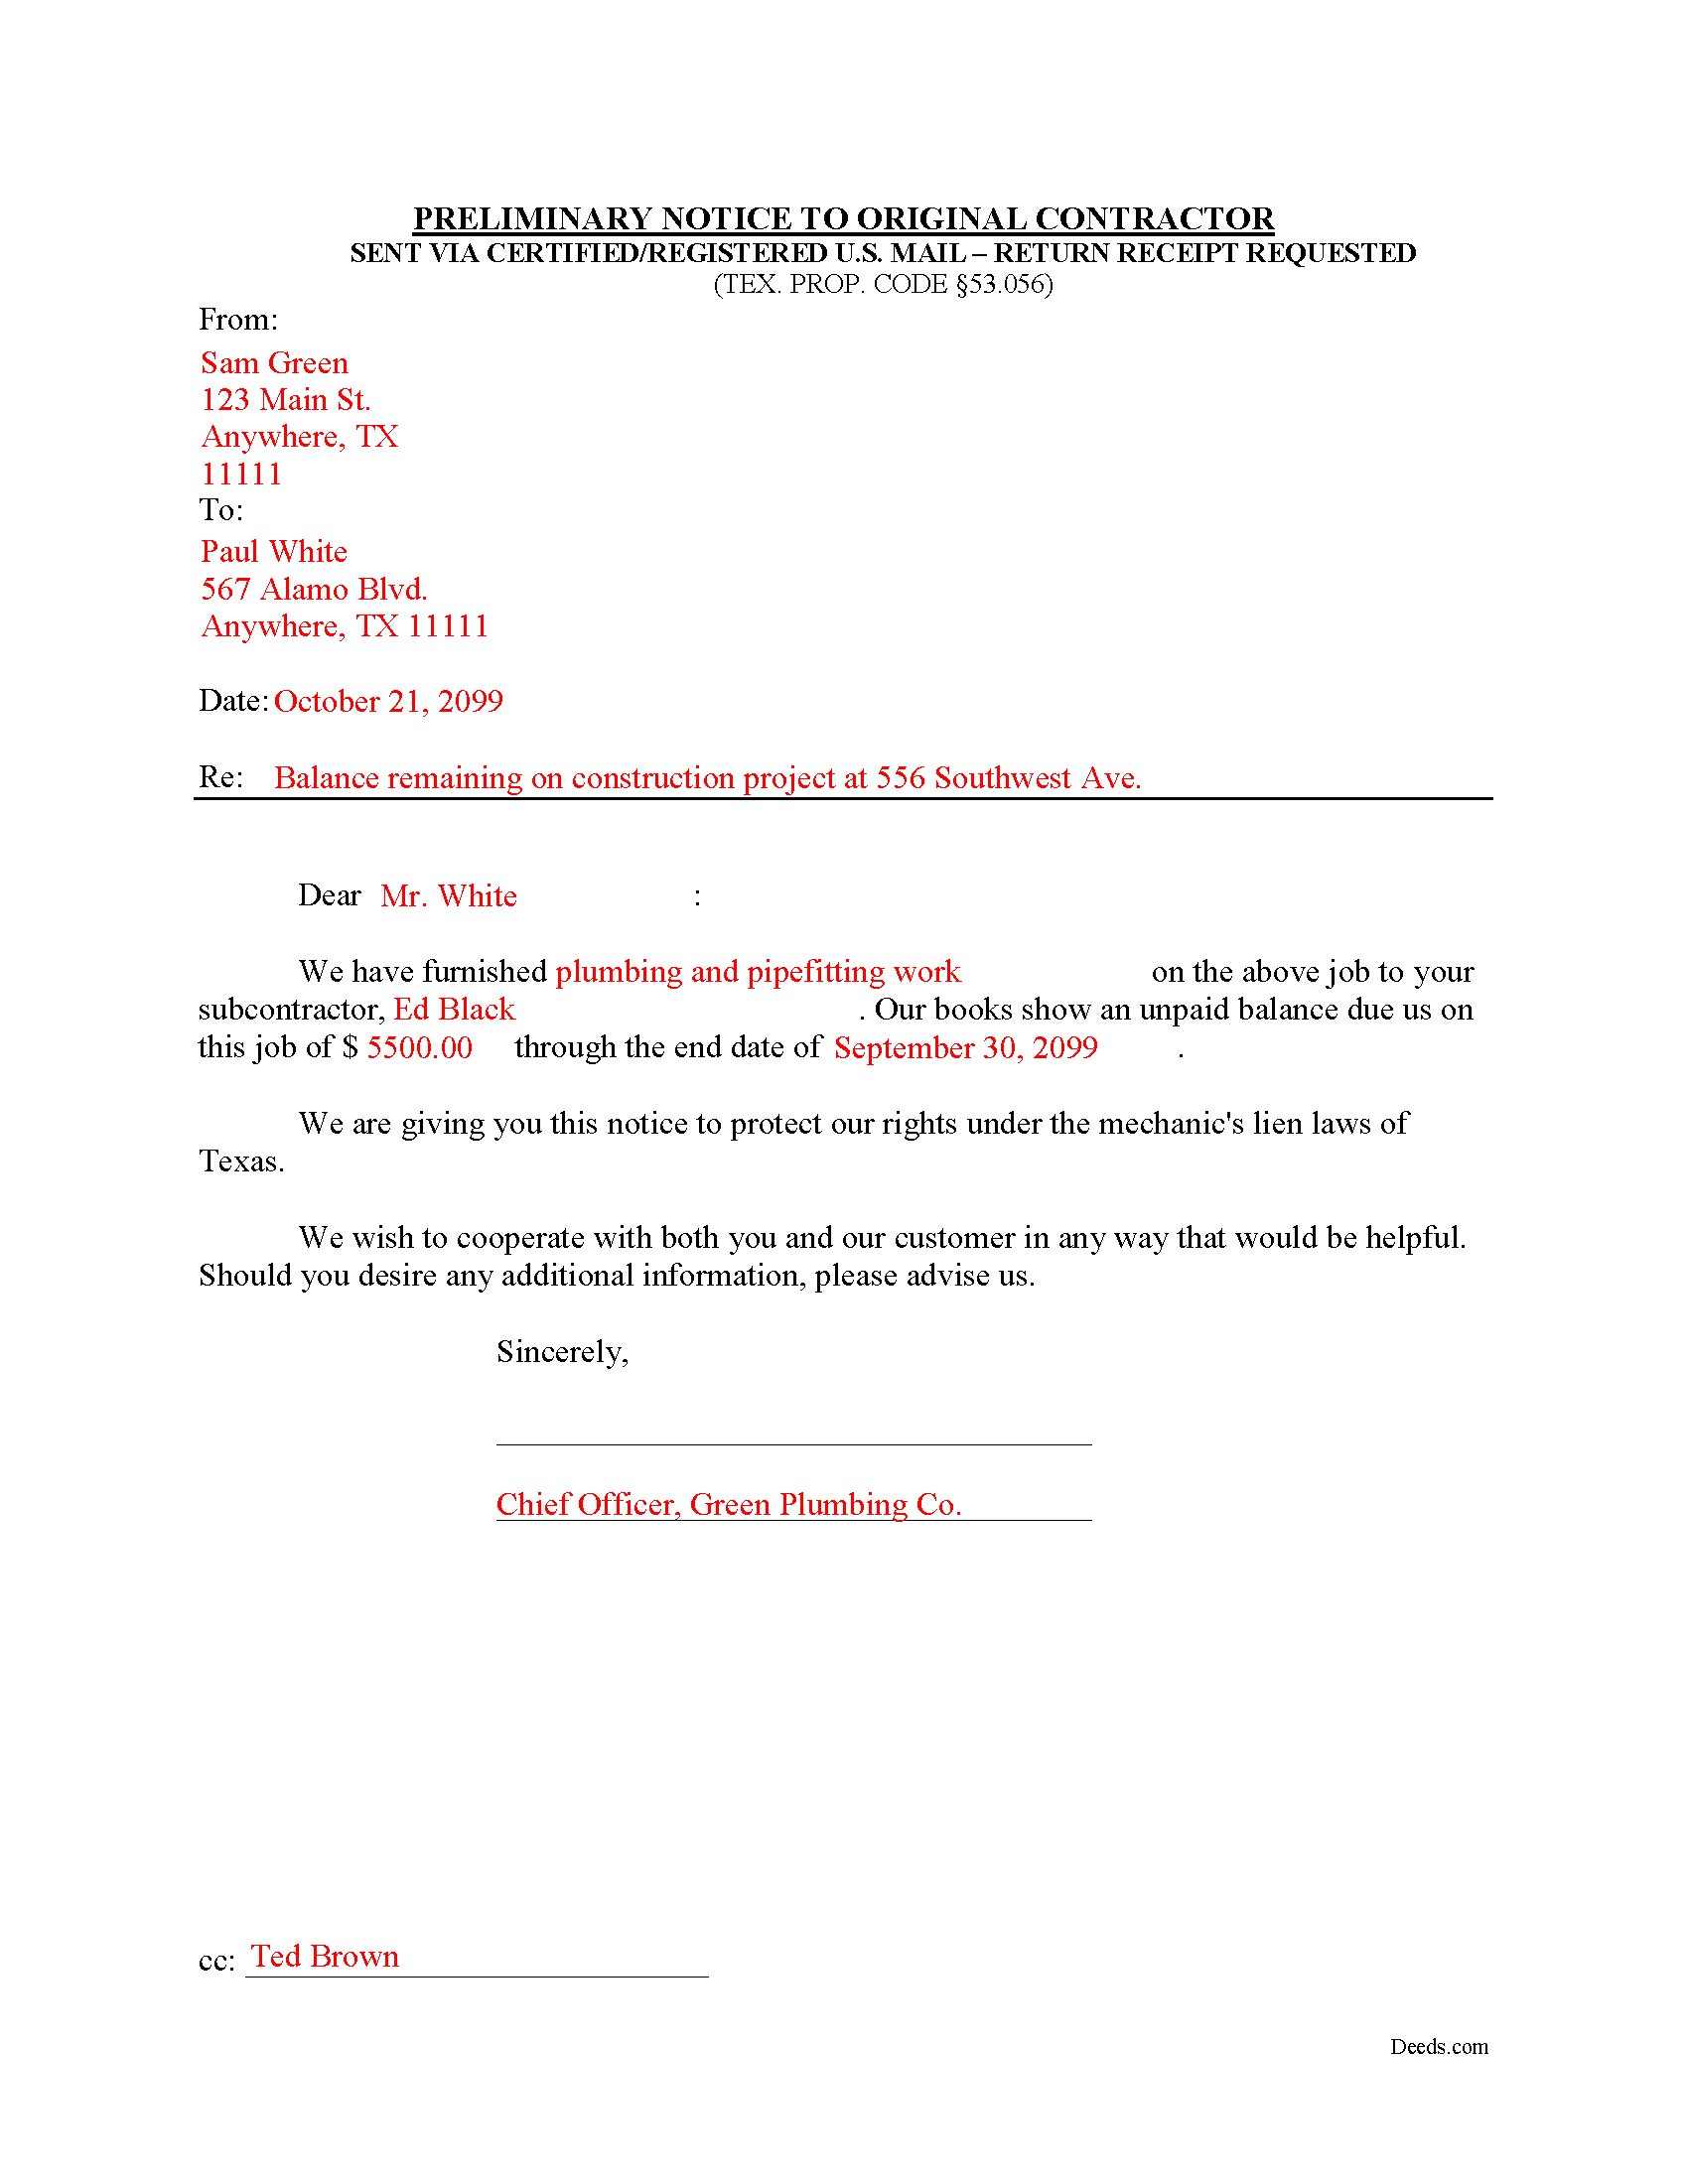 Completed Example of the Notice to Original Contractor Document